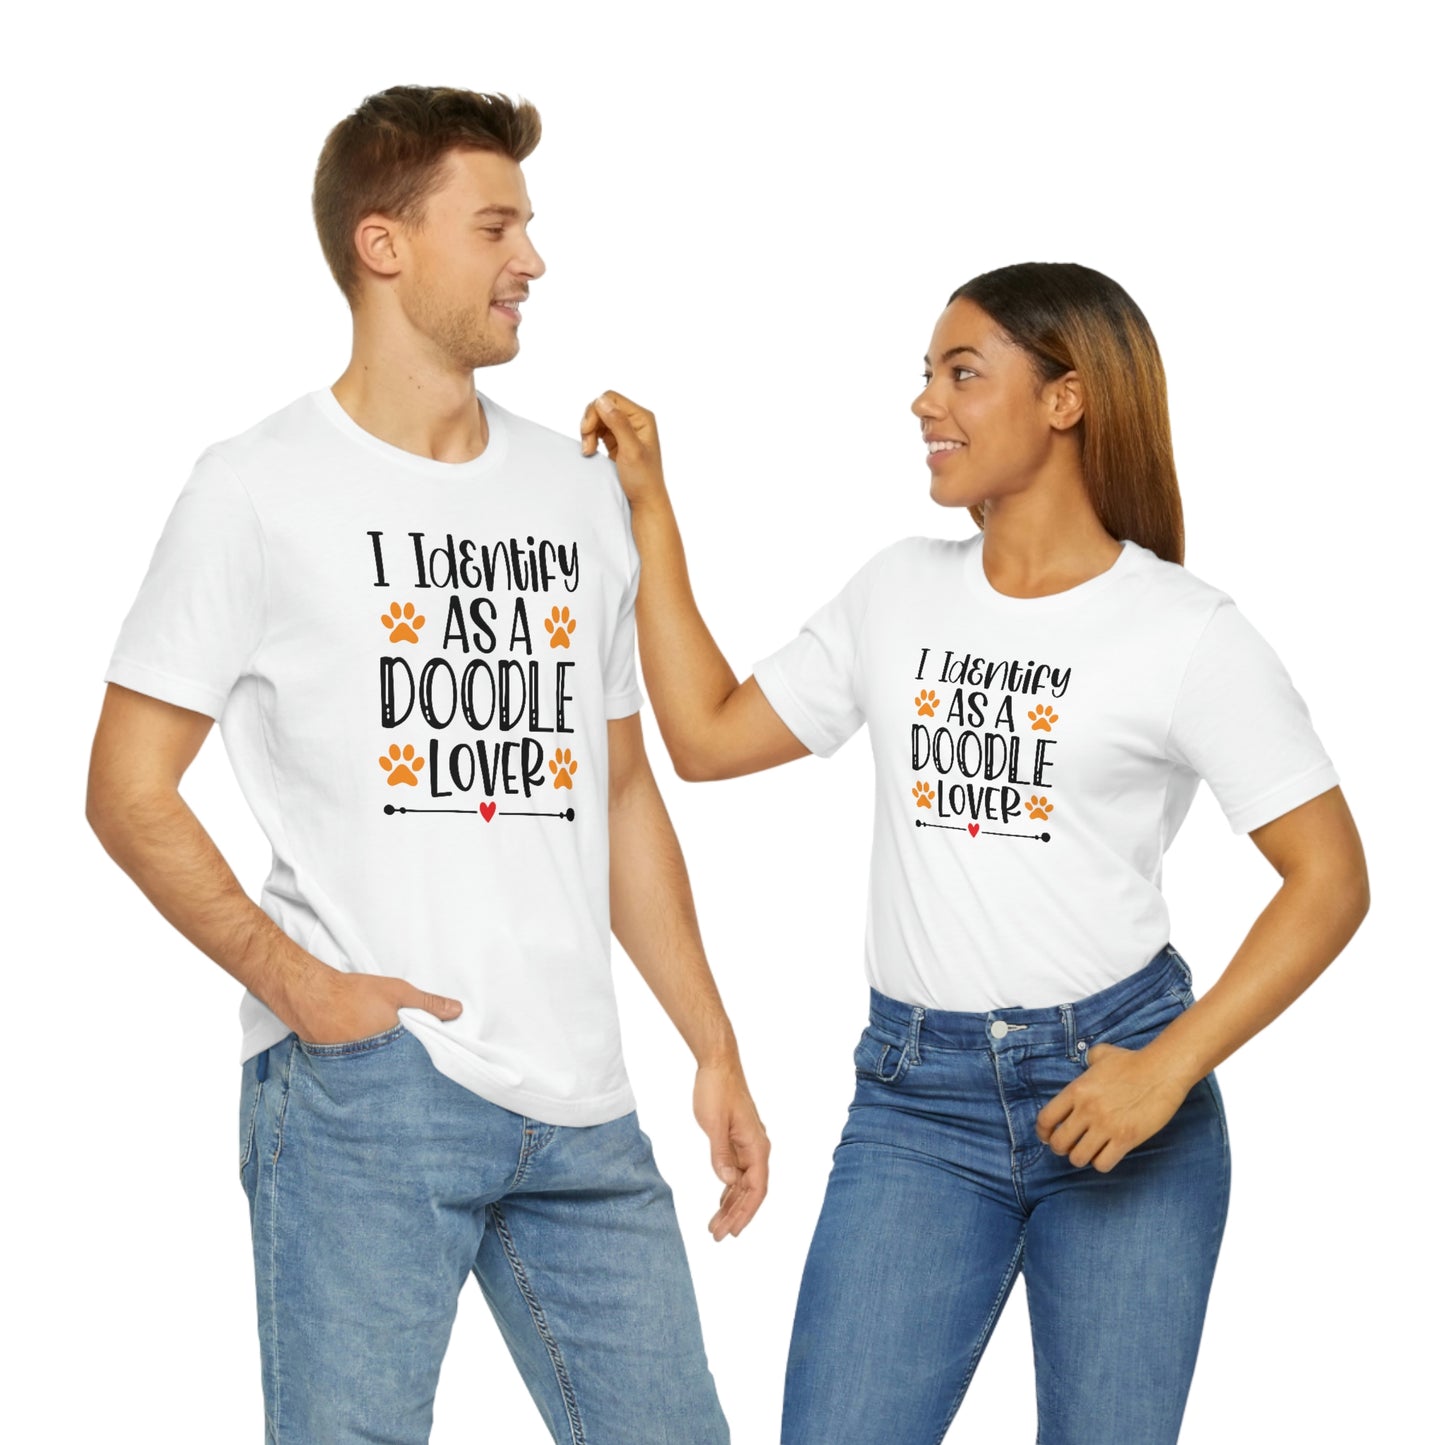 I Identify as a Doodle Lover T-shirt